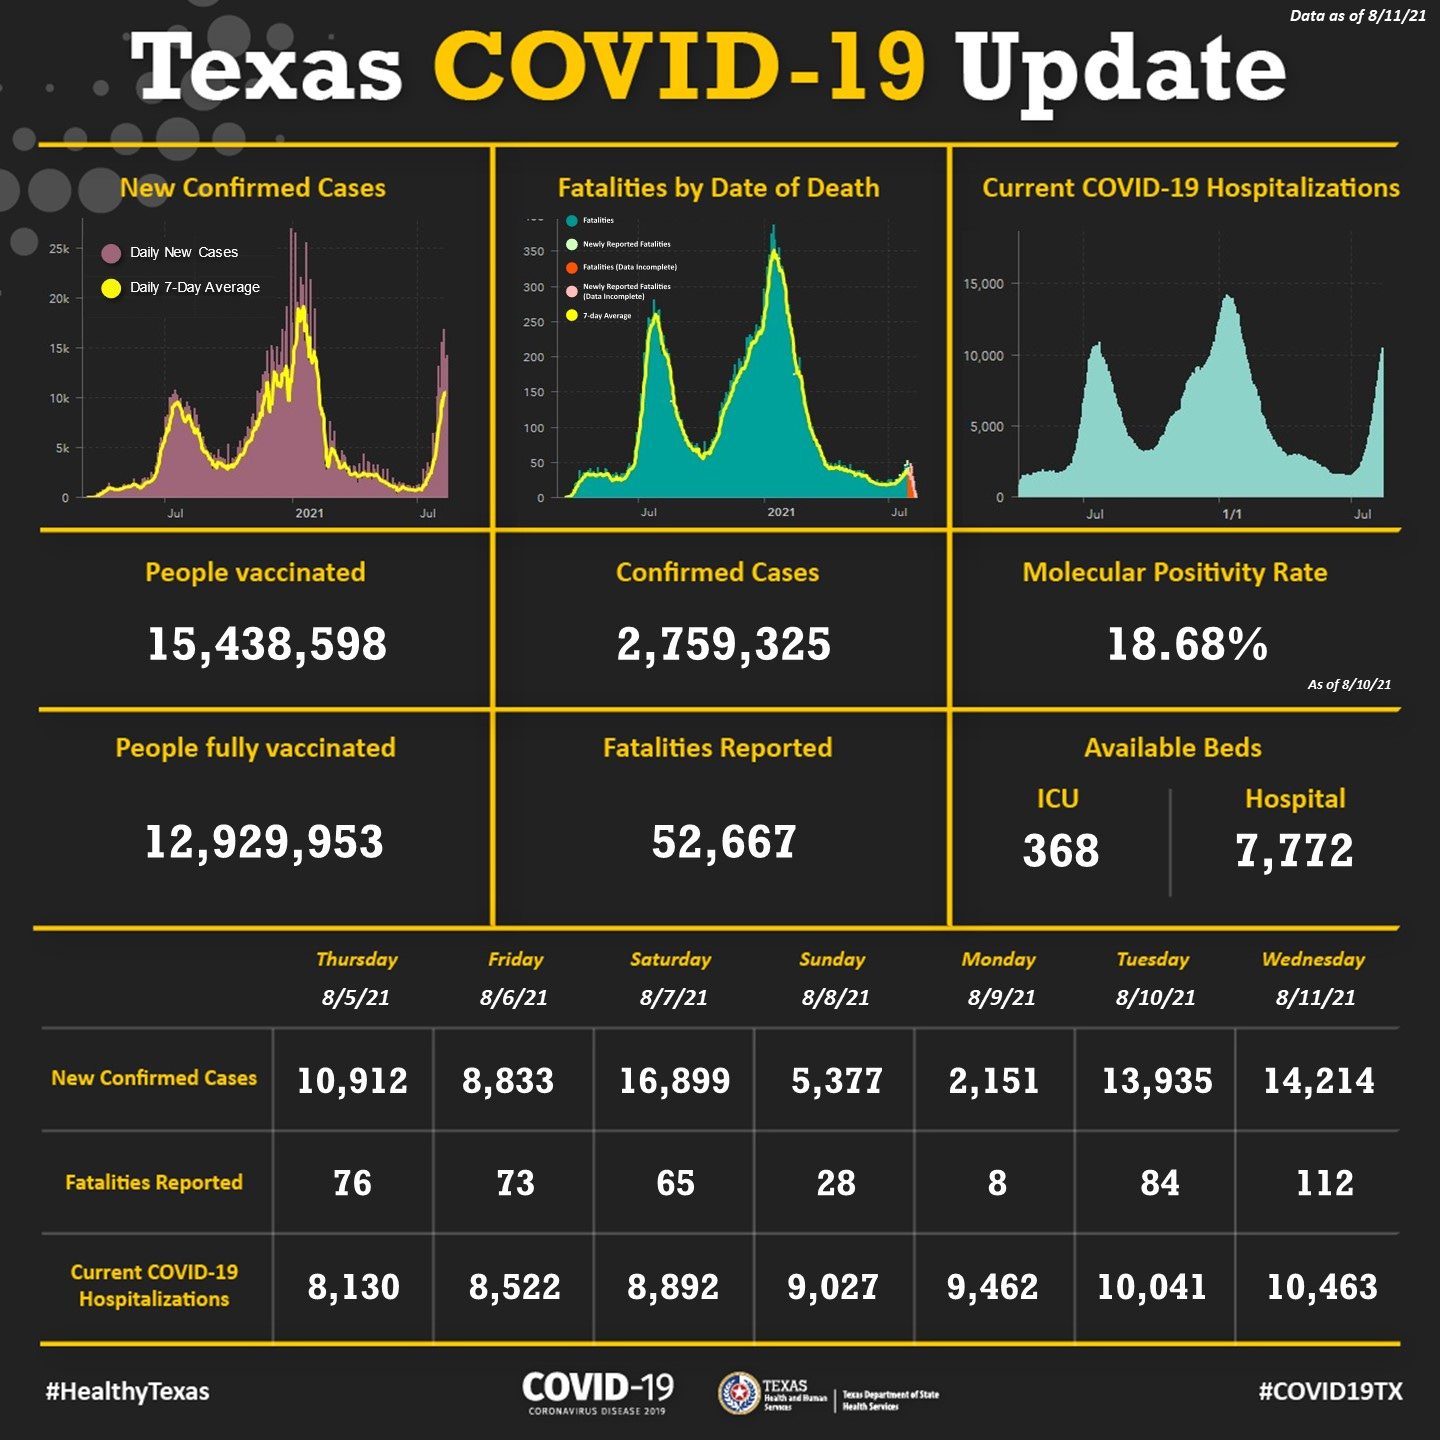 May be an image of text that says 'New Confirmed Cases Texas COVID-19 Update Datasof8/11/21 Data Cas Fatalities by Date Death Current COVID-19 Hospitalizations People vaccinated Confirmed Cases 15,438,598 People fully vaccinated Molecular Positivity Rate 2,759,325 Fatalities Reported 18.68% 12,929,953 Asof8/10/21 Available Beds 52,667 ICU 368 8/5/21 Friday 8/6/21 Hospital 7,772 New Confirmed Cases Saturday 8/7/21 Sunday 8/8/21 10,912 Monday 8/9/21 8,833 Tuesday 8/10/21 Fa Reported 16,899 Wednesday 8/11/21 5,377 76 73 2,151 65 CurrenCOD19 Hospitalizations 13,935 28 14,214 8,130 8 8,522 84 #HealthyTexas 8,892 112 9,027 9,462 COVID-19 10,041 10,463 #COVID19TX'